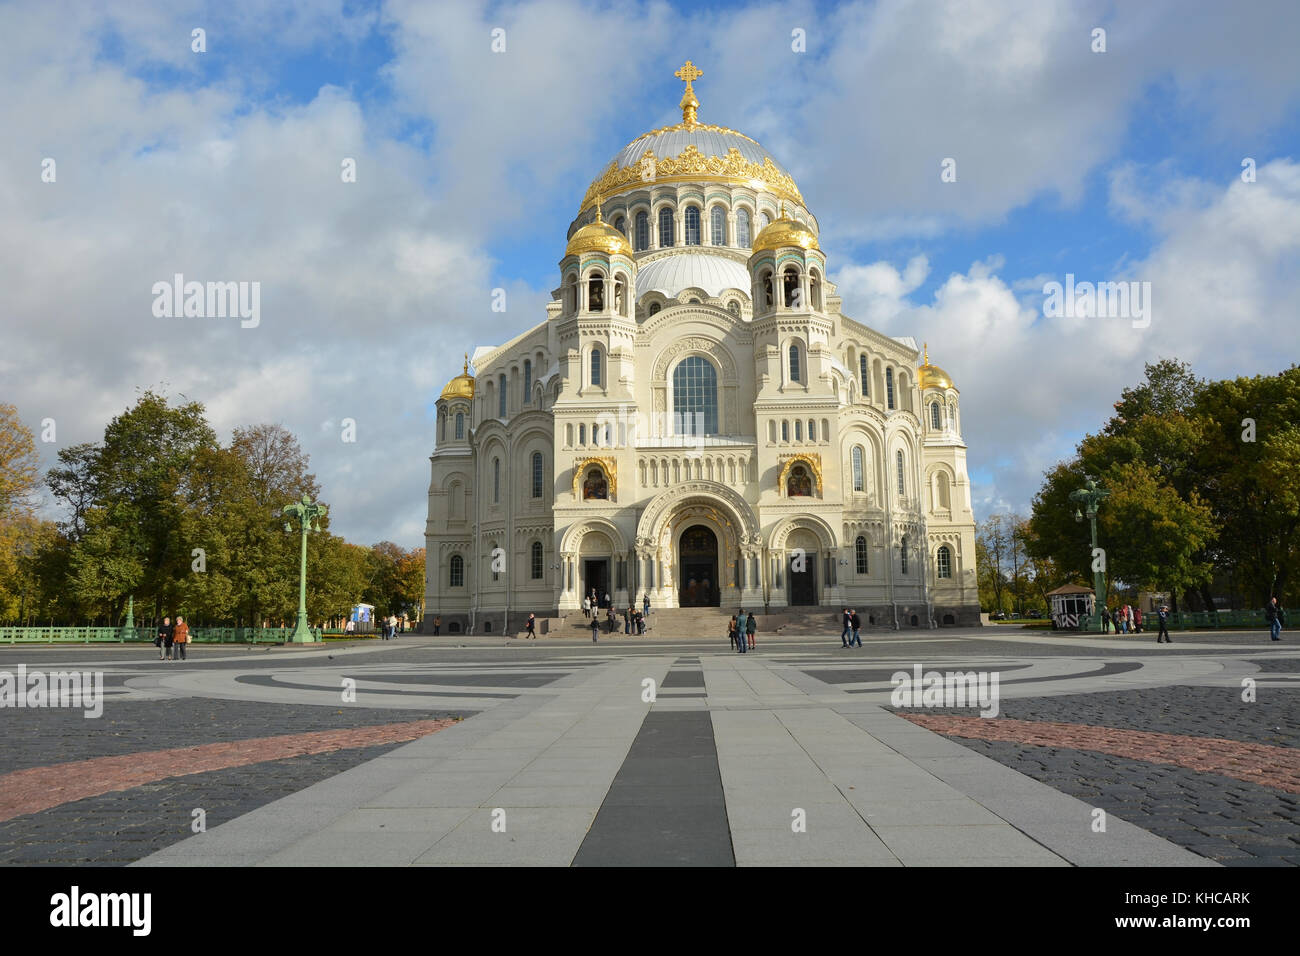 Orthodox cathedral of St. Nicholas in town Kronshtadt, Russia. Second name of cathedral is 'Sea cathedral' Stock Photo